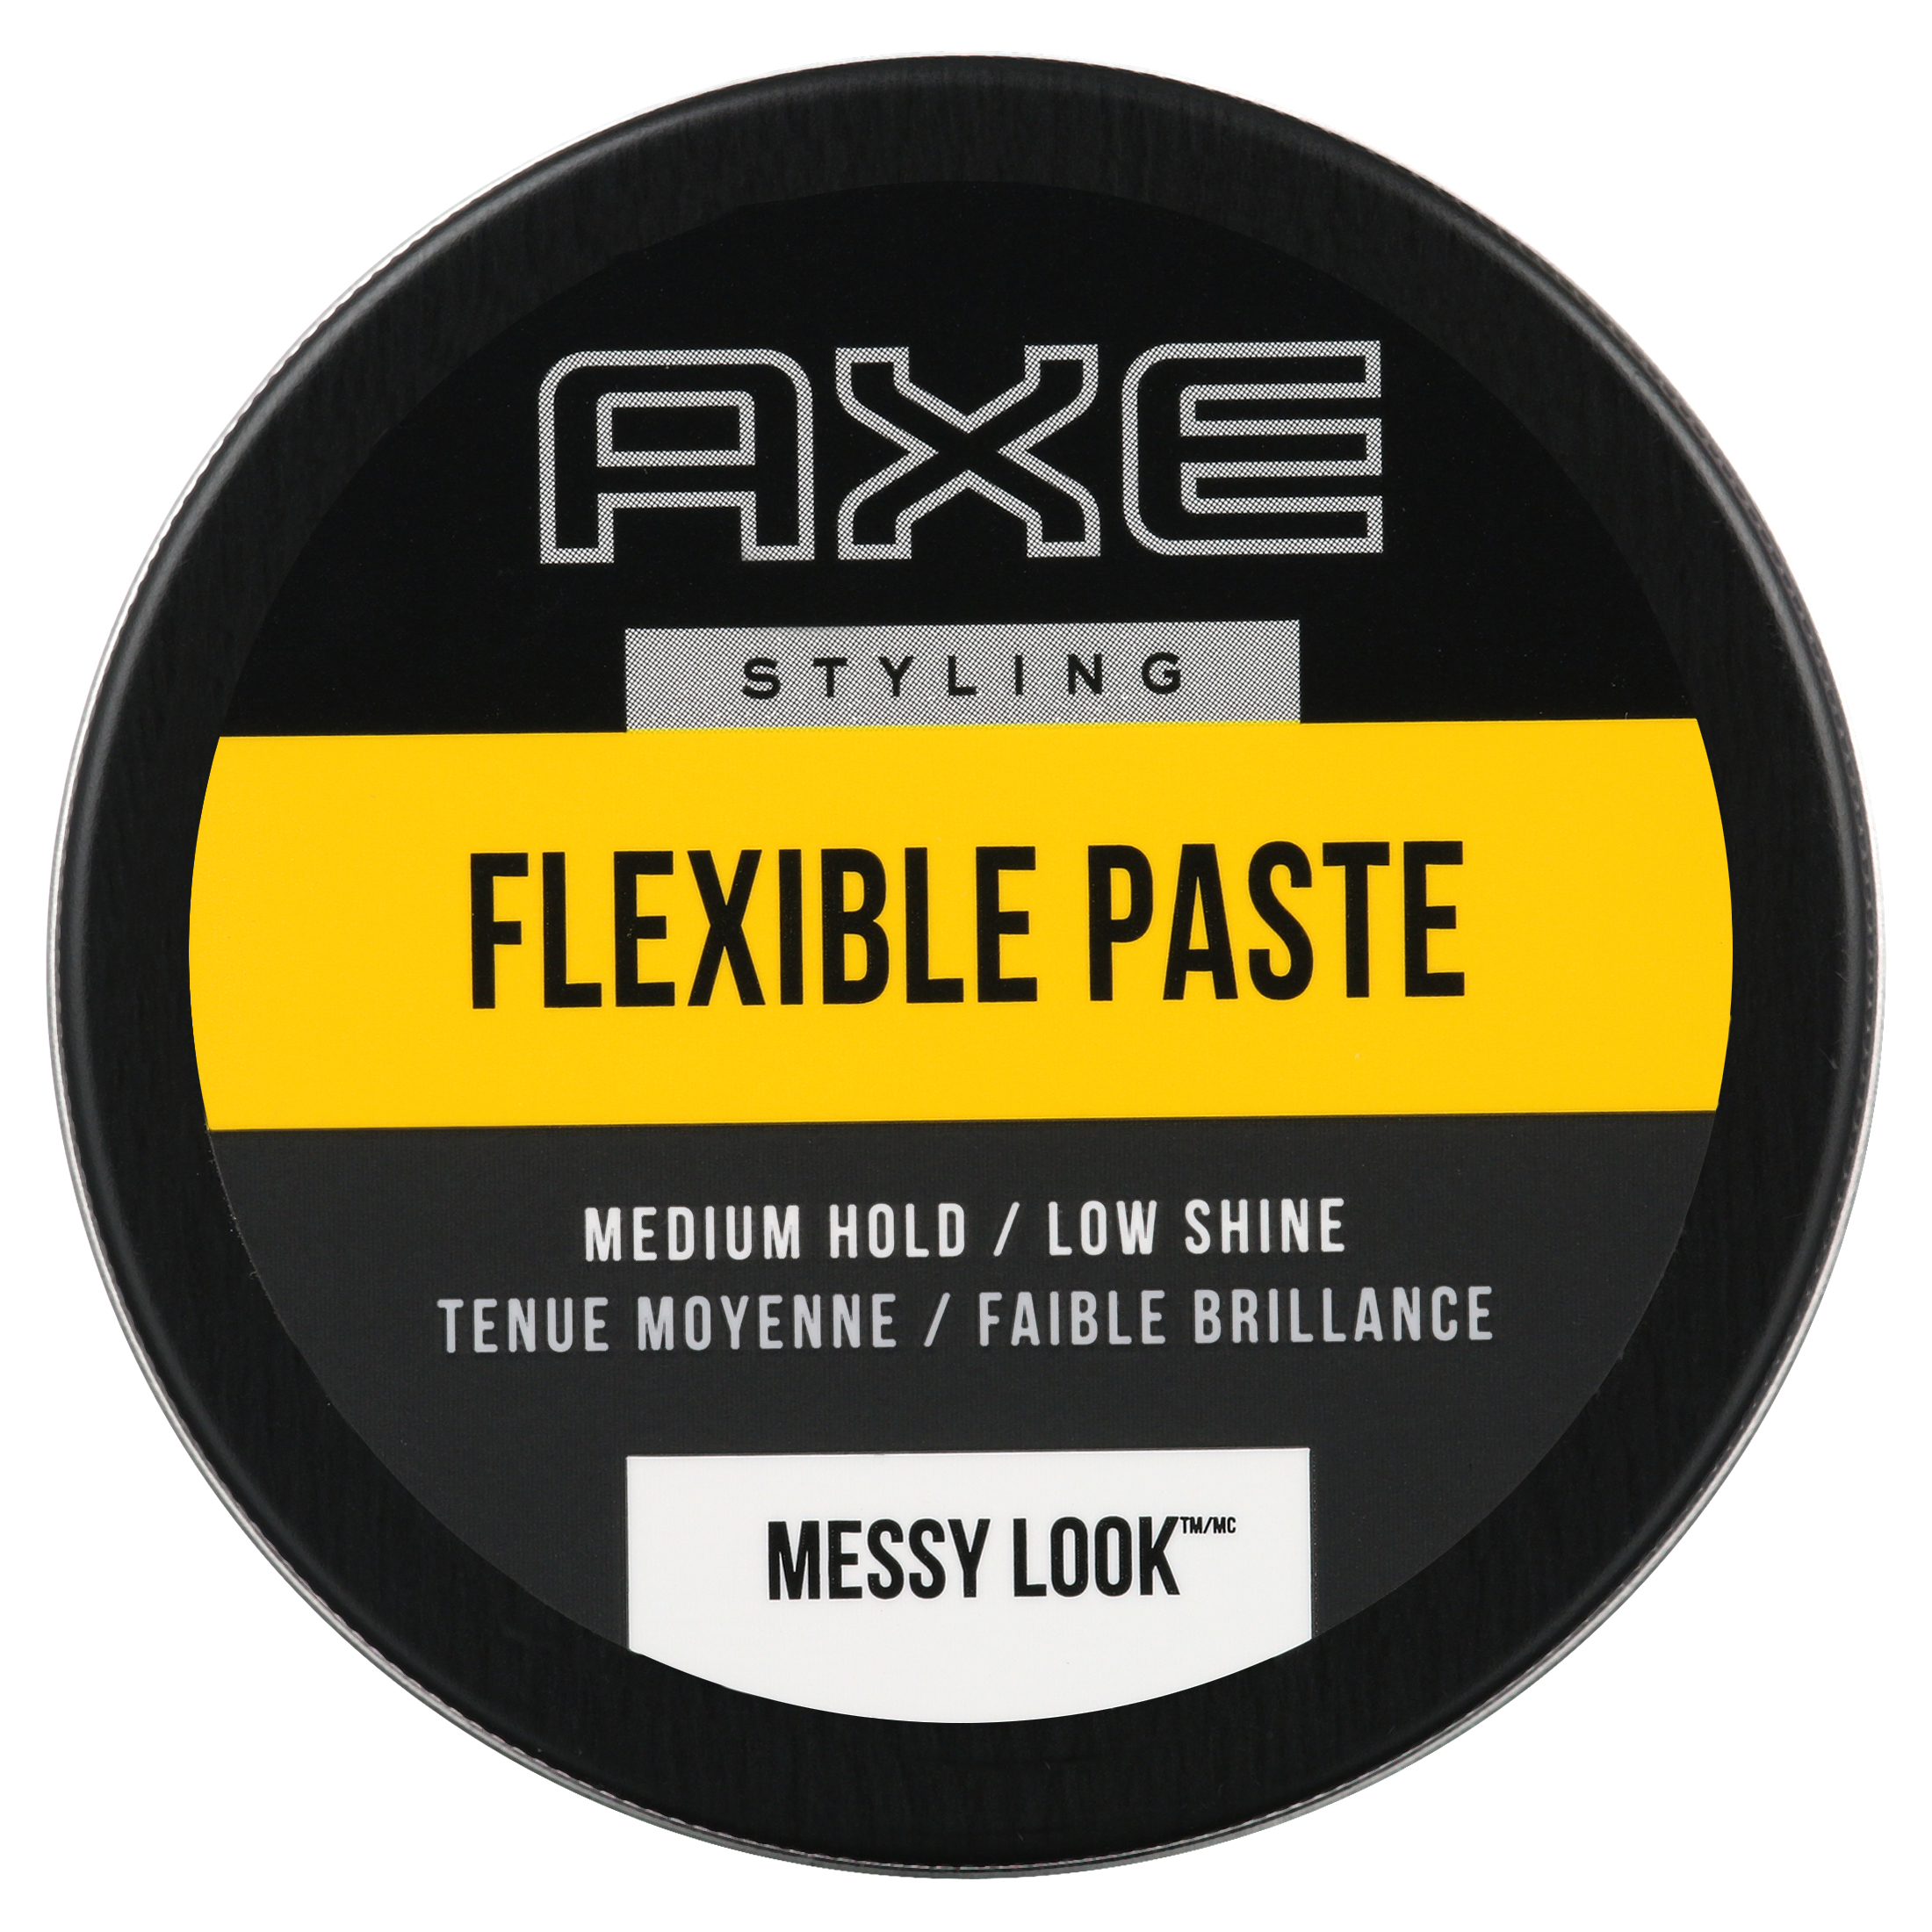 Axe Styling Messy Look Flexible Texturizing Hair Styling Gel, 2.64 oz - image 1 of 6